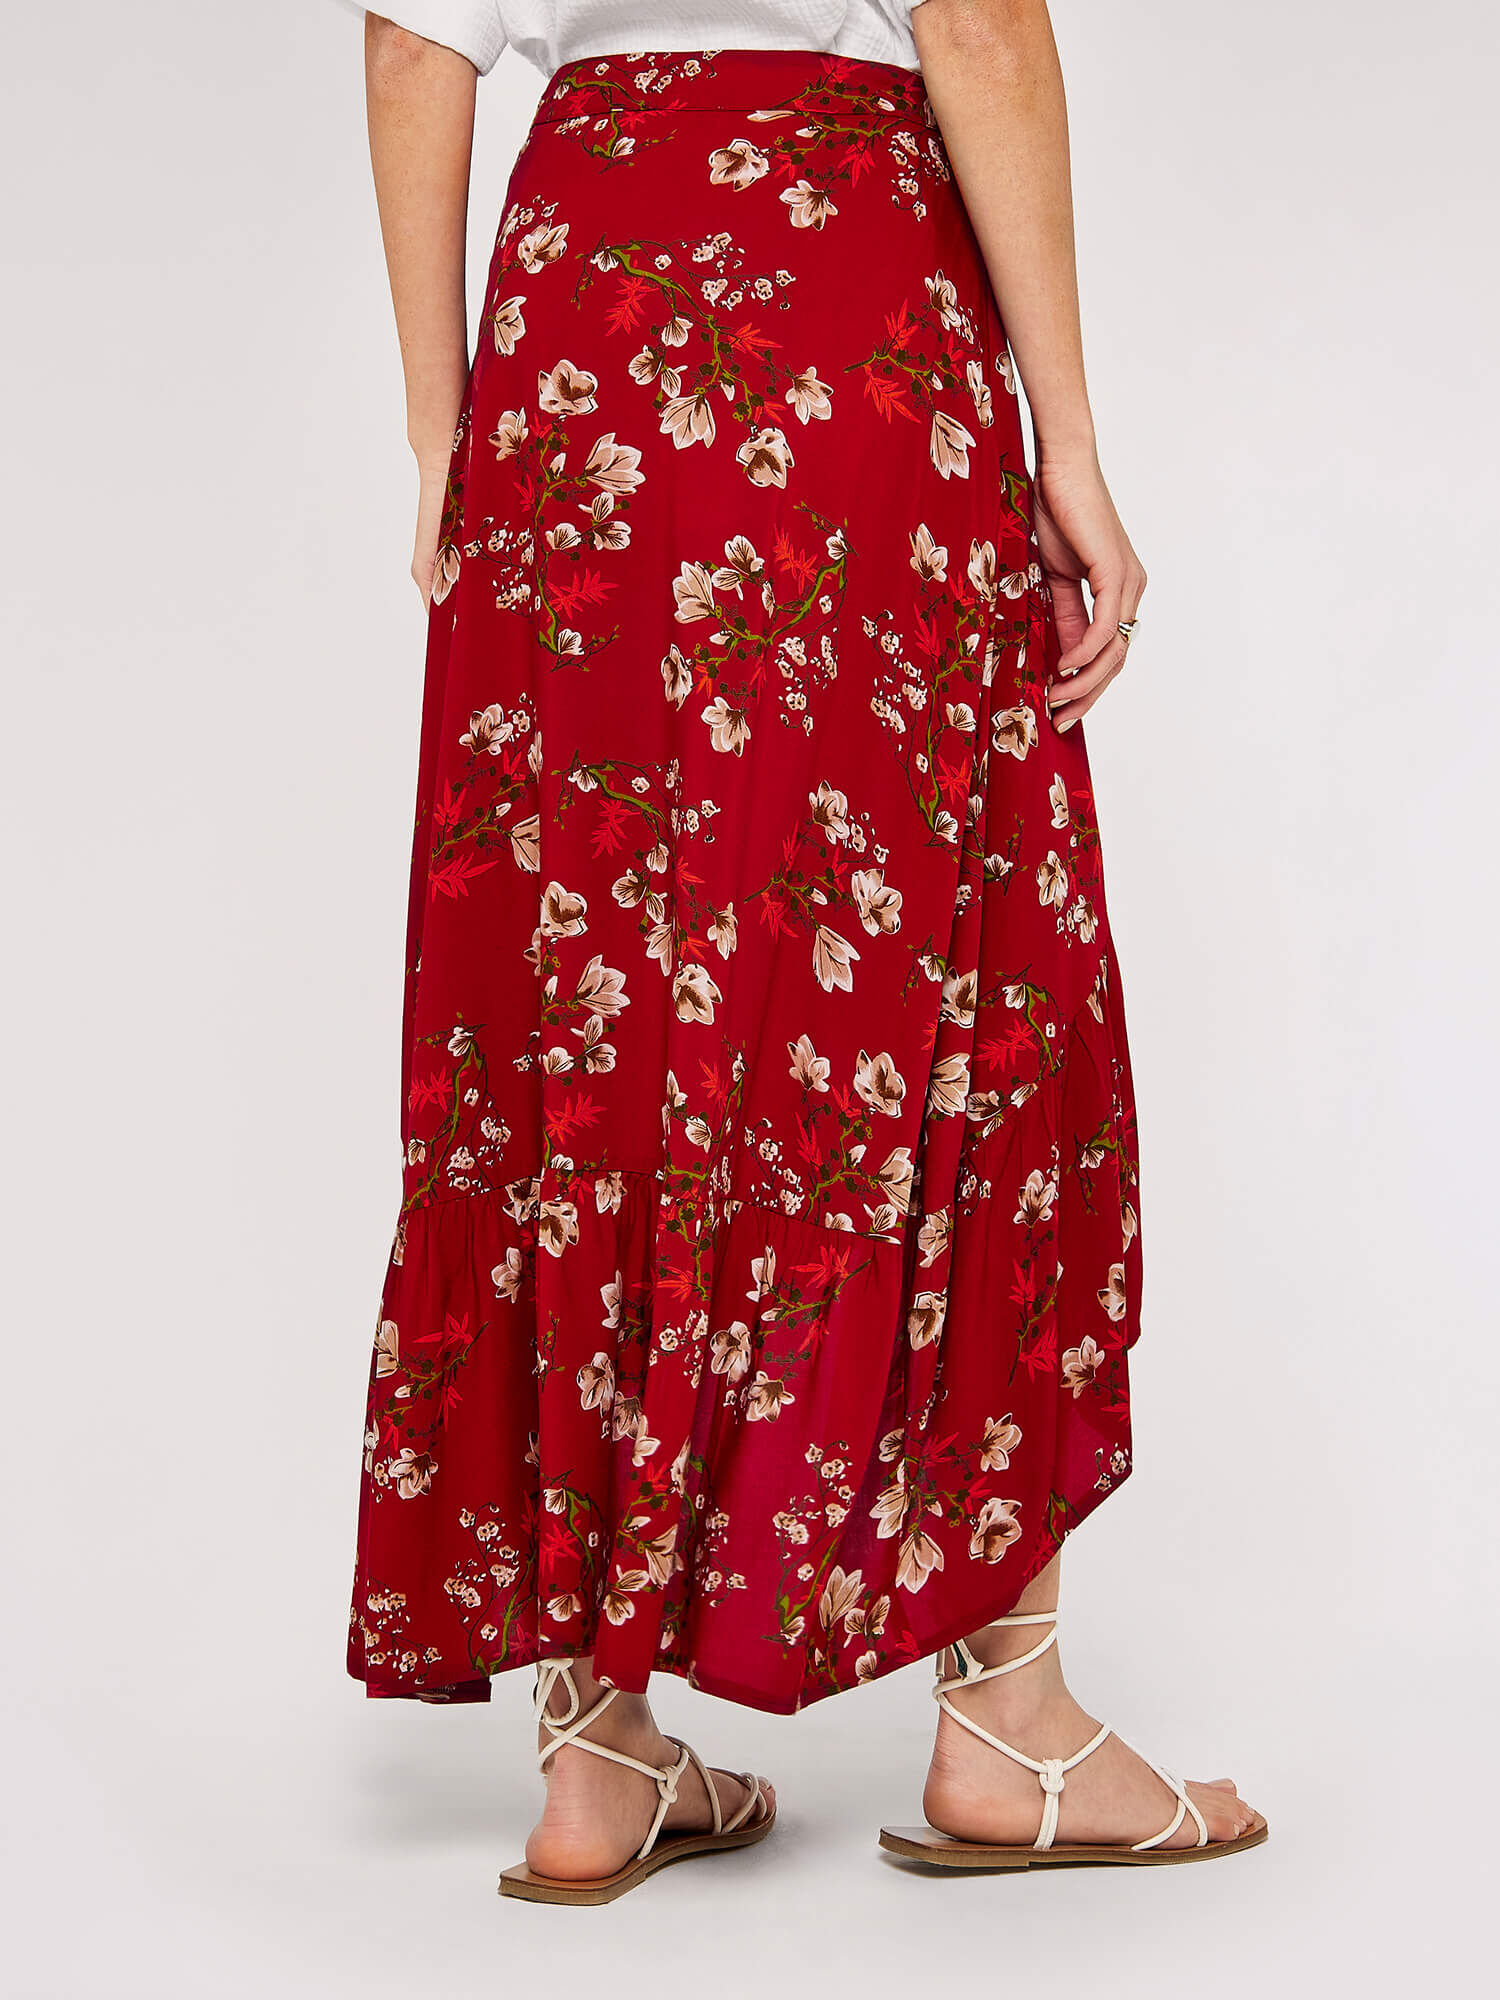 BerryGo Women's Boho Floral Wrap Maxi Skirt High Waisted Long Skirt with  Slit Orange-S : Amazon.ca: Clothing, Shoes & Accessories